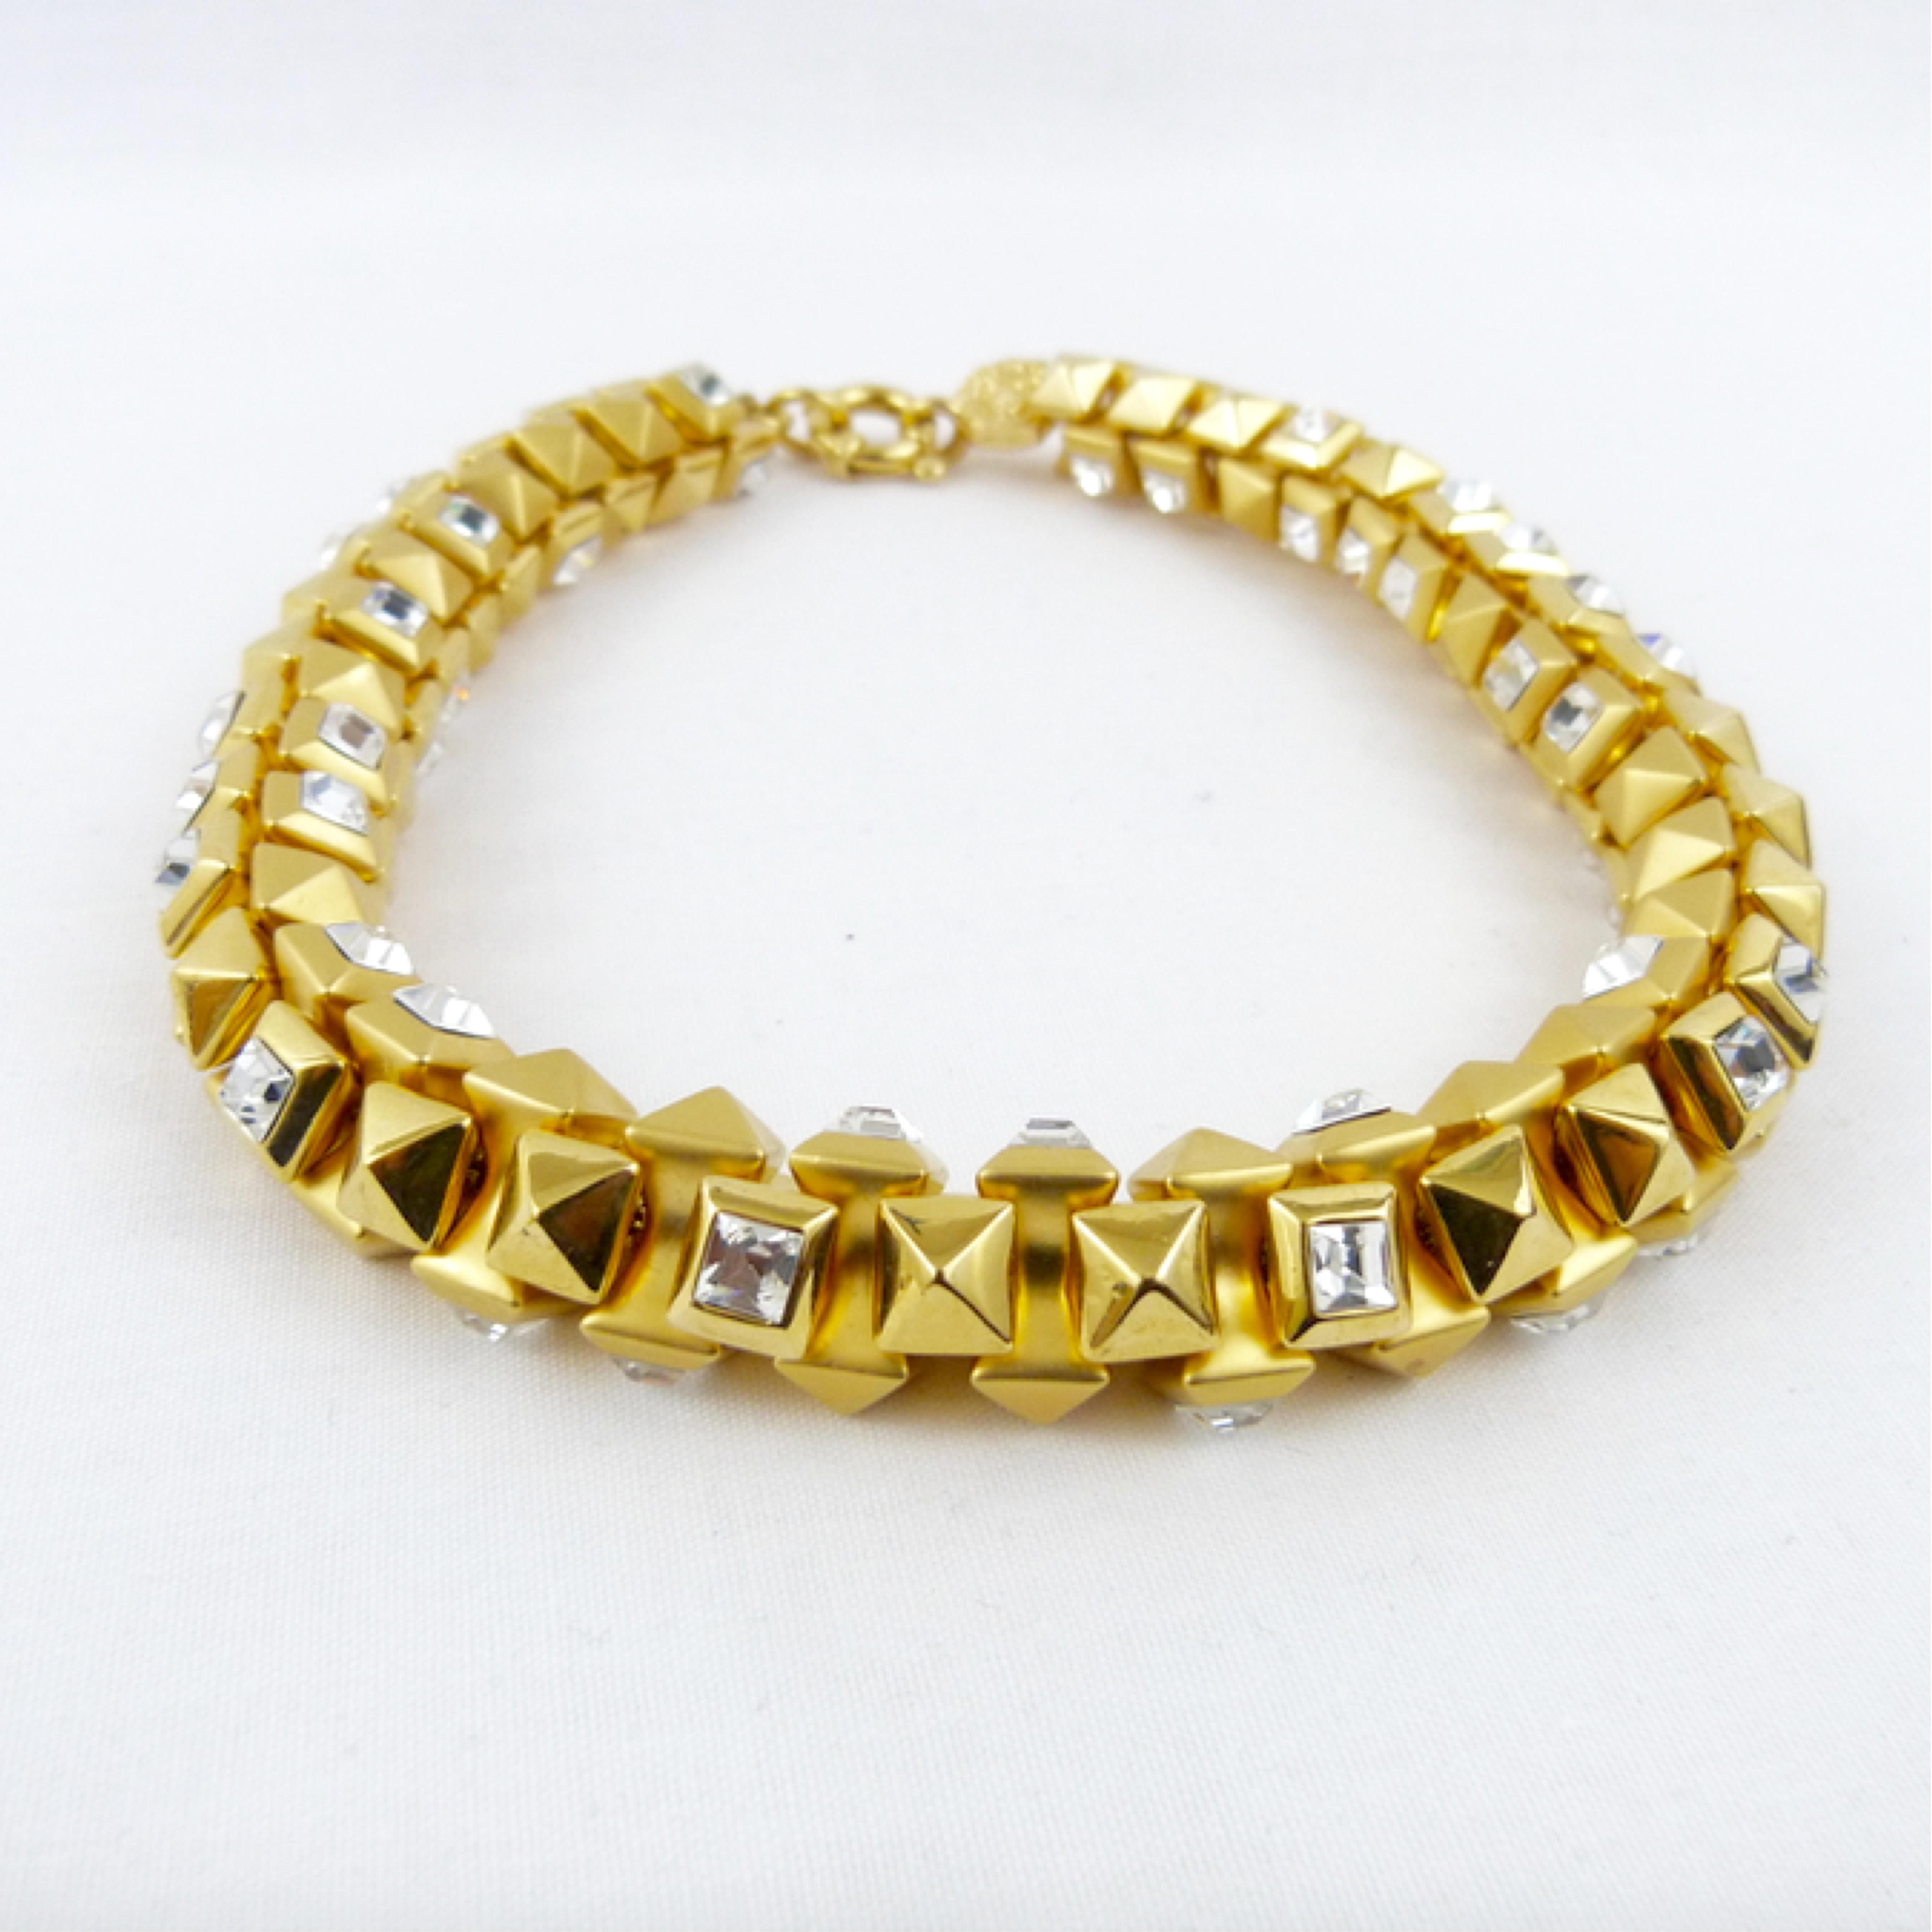 This beautiful gold tone Gianni Versace choker has a lovely stud shape feature which makes the necklace three dimensional. The necklace also has stones placed within the gold pyramids to add a subtle sparkle to the vintage piece. This choker sits